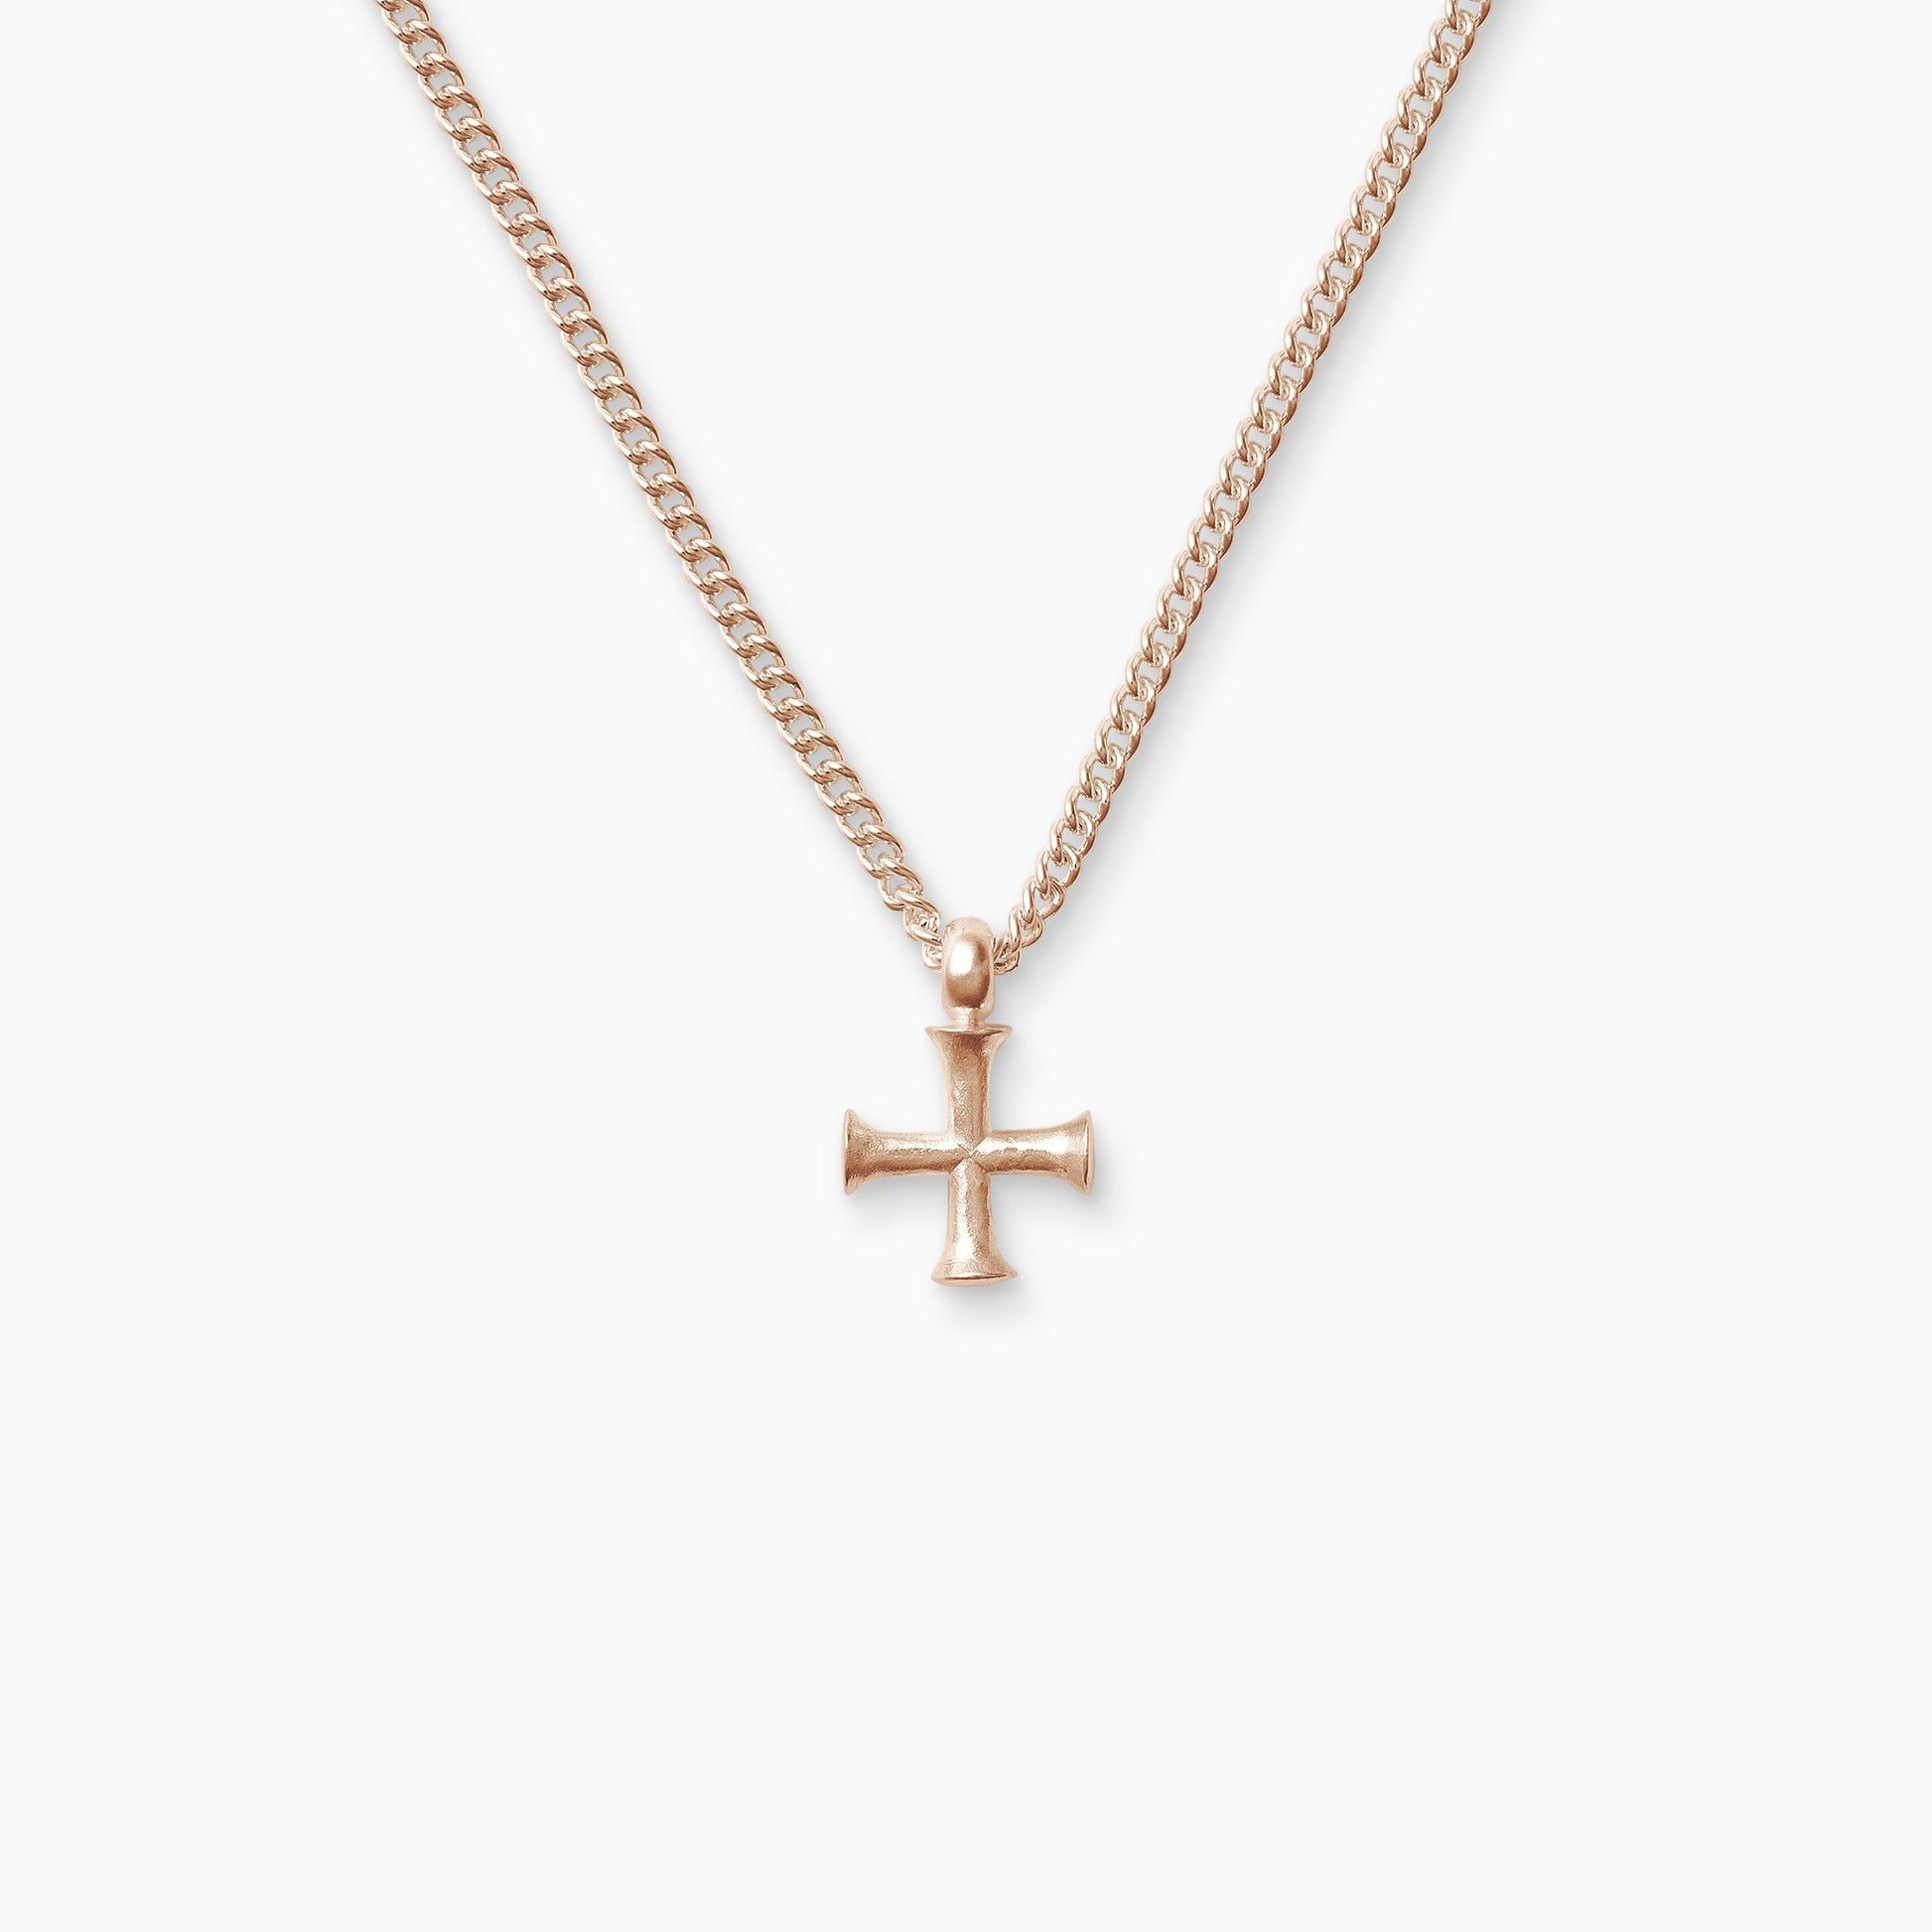 18ct Fairtrade rose gold Byzantine cross, 21mm on a 55cm heavy curb chain. The cross has equal length arms with outward spreading ends.